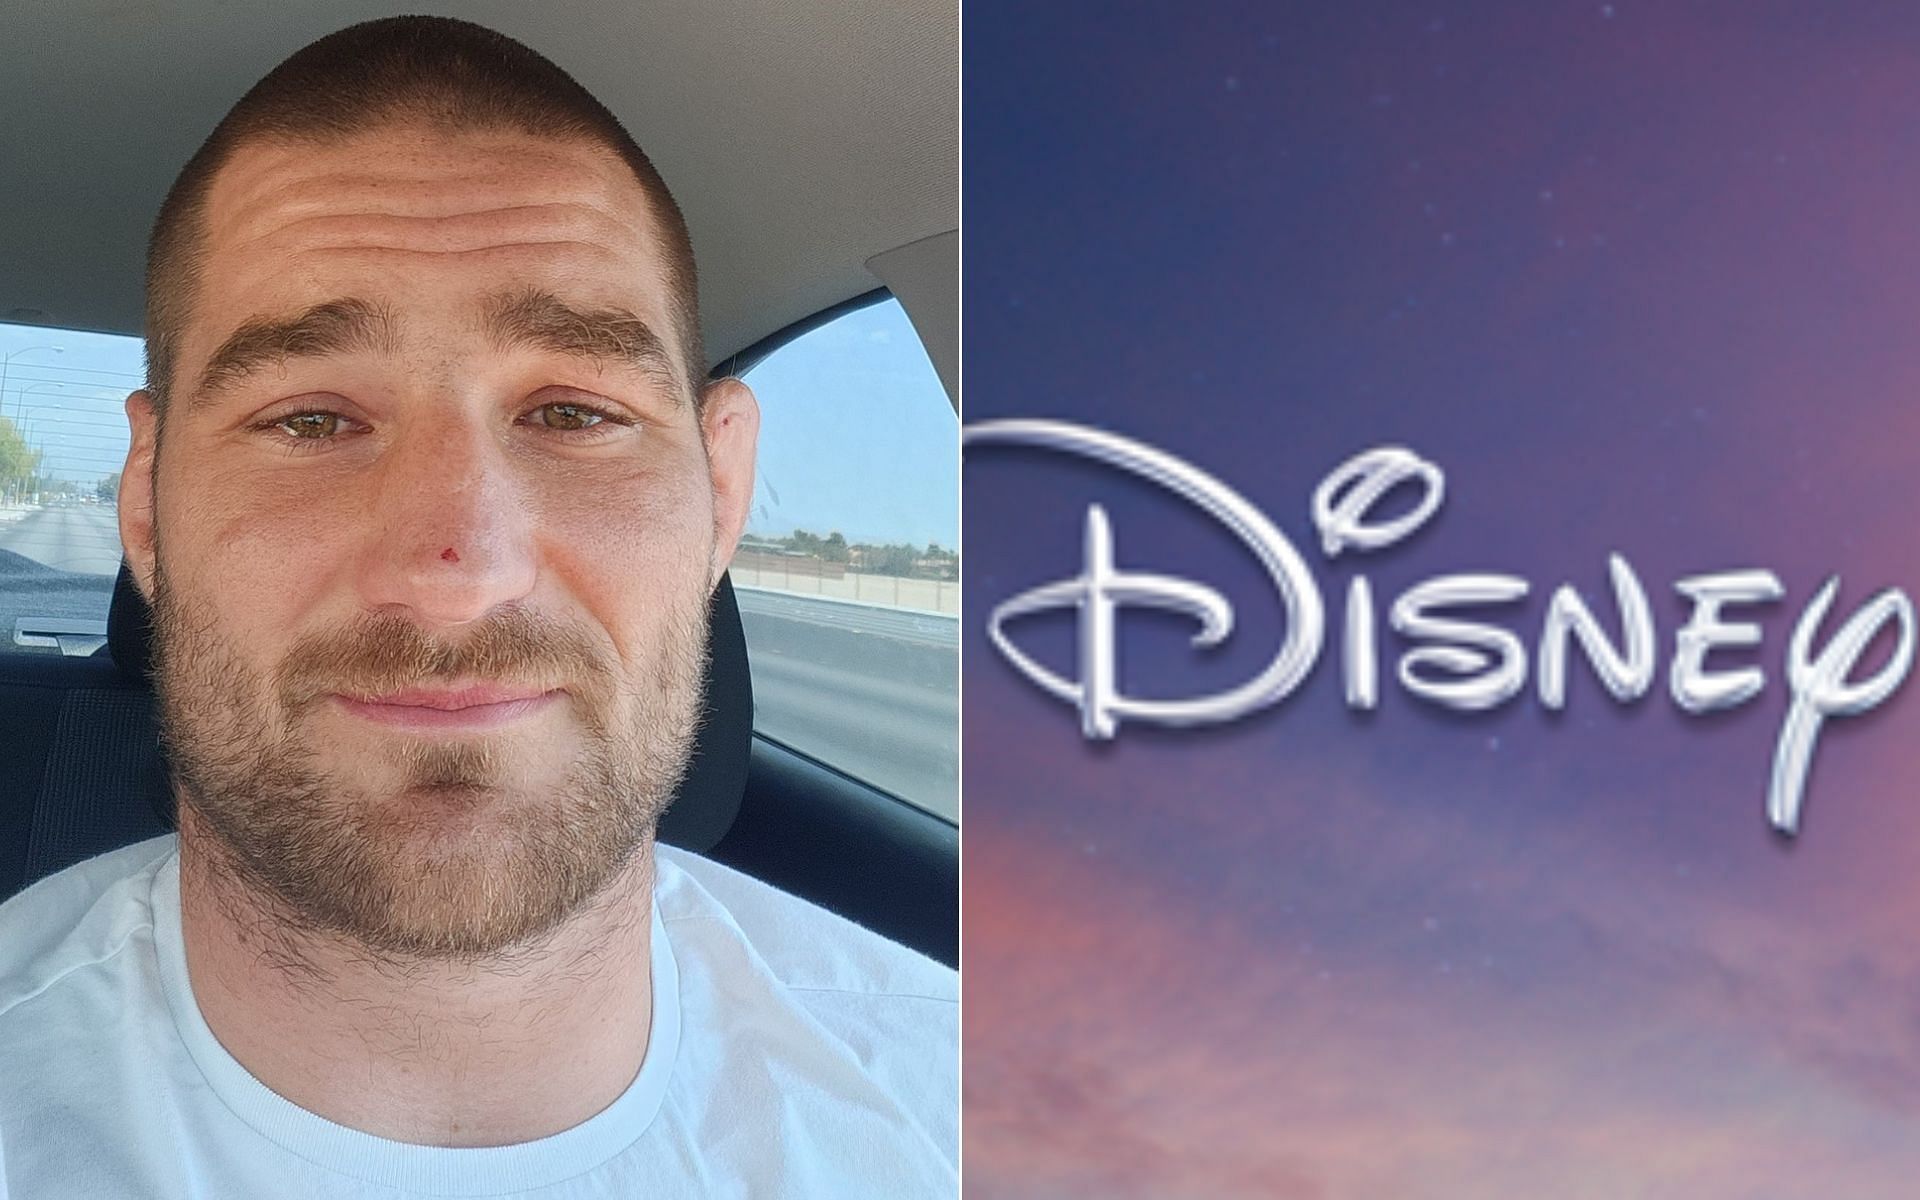 Sean Strickland [Left], and Disney logo [Right] [Photo credit: @SSticklandMMA and @Disney - Twitter]